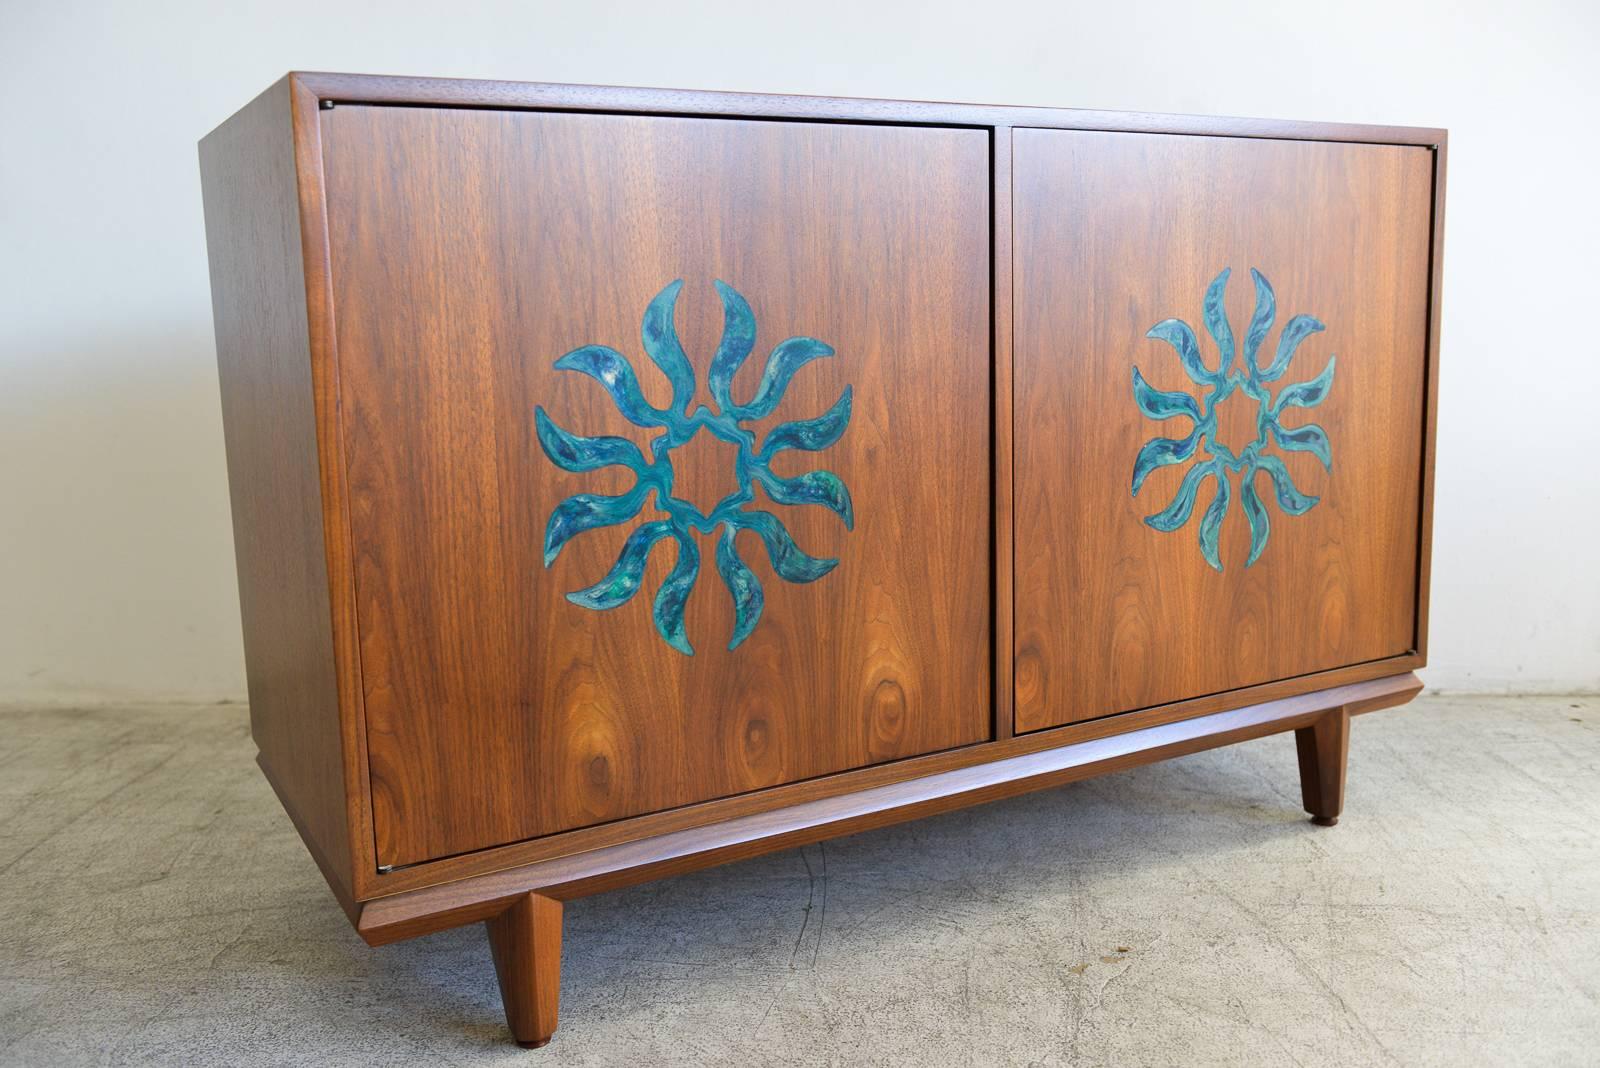 Walnut and enameled two-door dresser by Cal Mode, circa 1970. Professionally restored in showroom perfect condition. Beautiful green/blue enameled sunburst motif on front. Cabinet opens to reveal two adjustable inner shelves. Finished on the